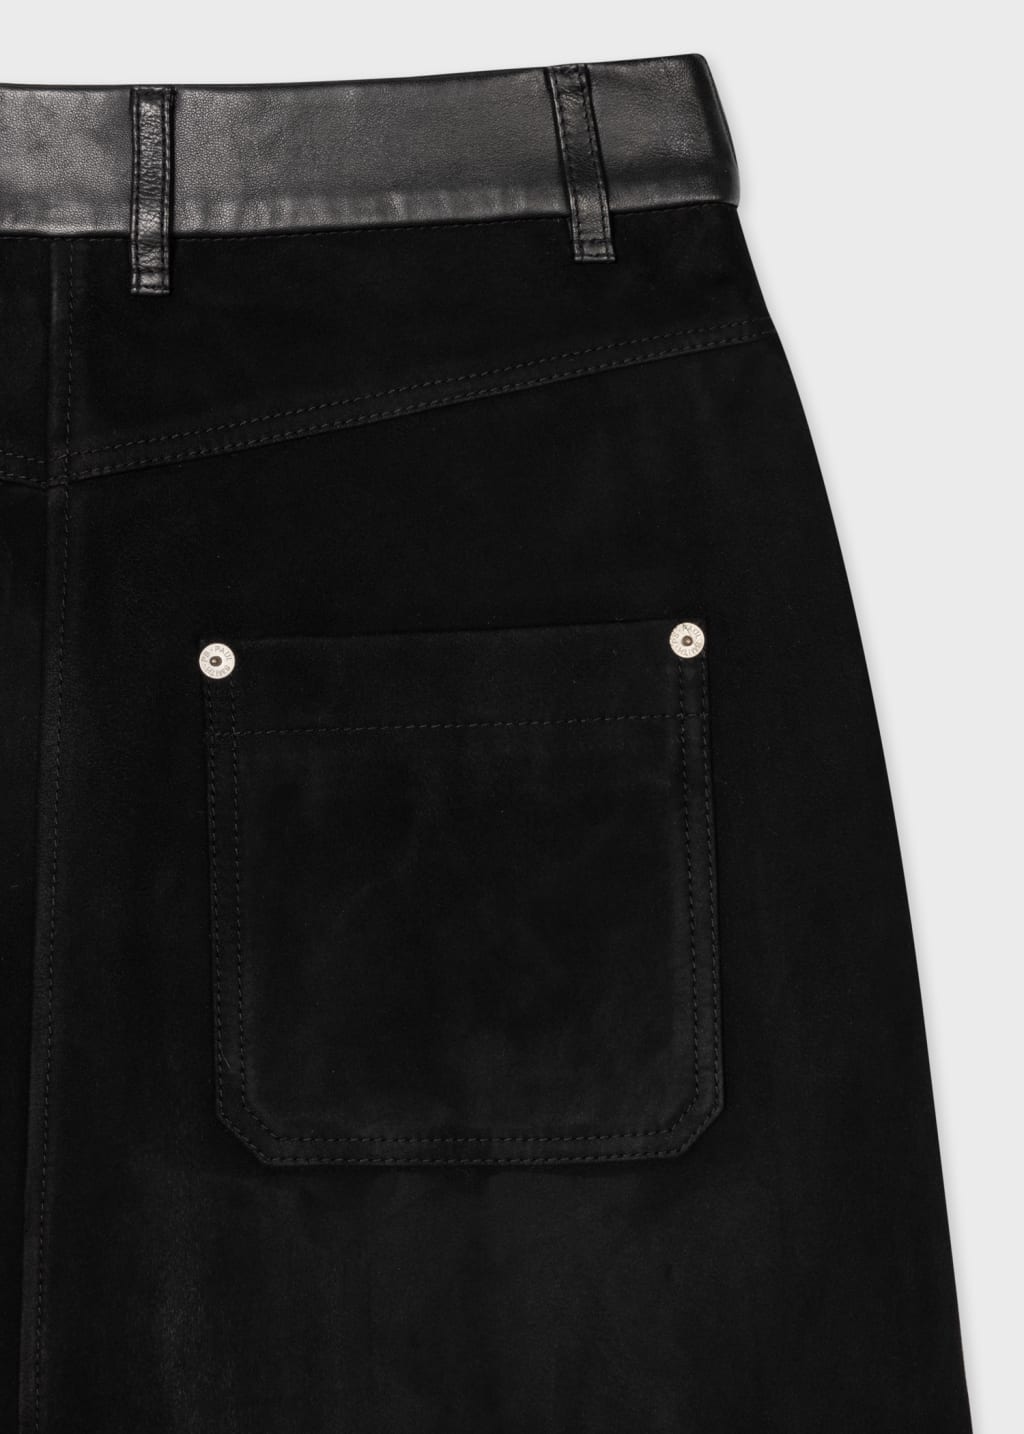 Detail View - Women's Black Suede Contrasting Short Skirt Paul Smith